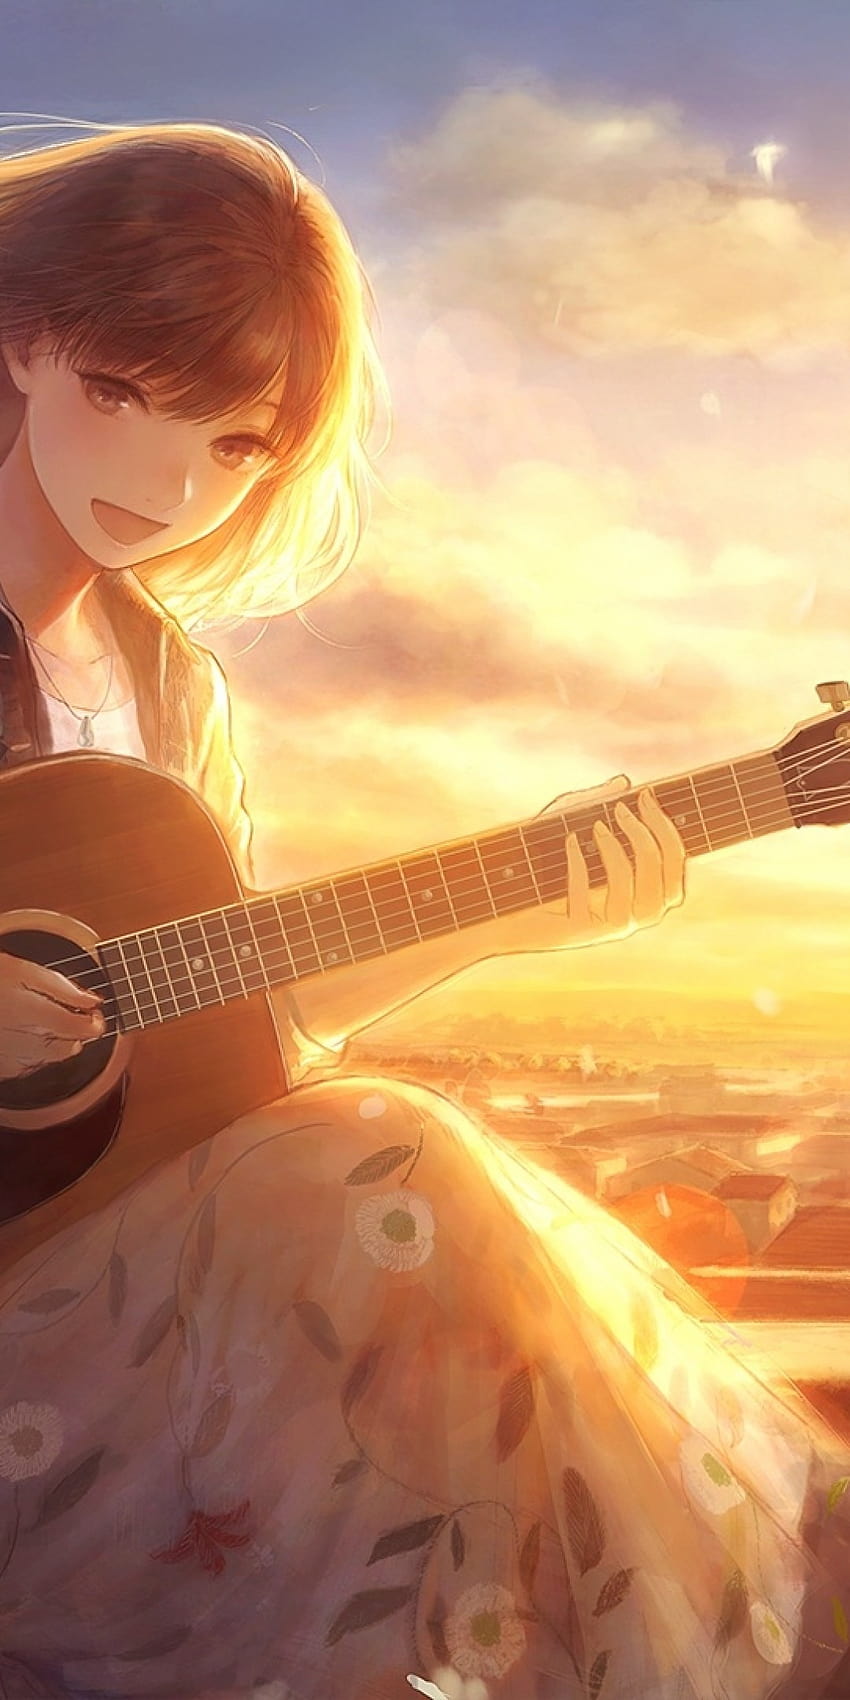 1080x2160 Anime Girl, Singing, Sunlight, Guitar, Instrument, Flowers, Wind, Petals, Cat, Scenic for Huawei Mate 10, anime singing HD phone wallpaper